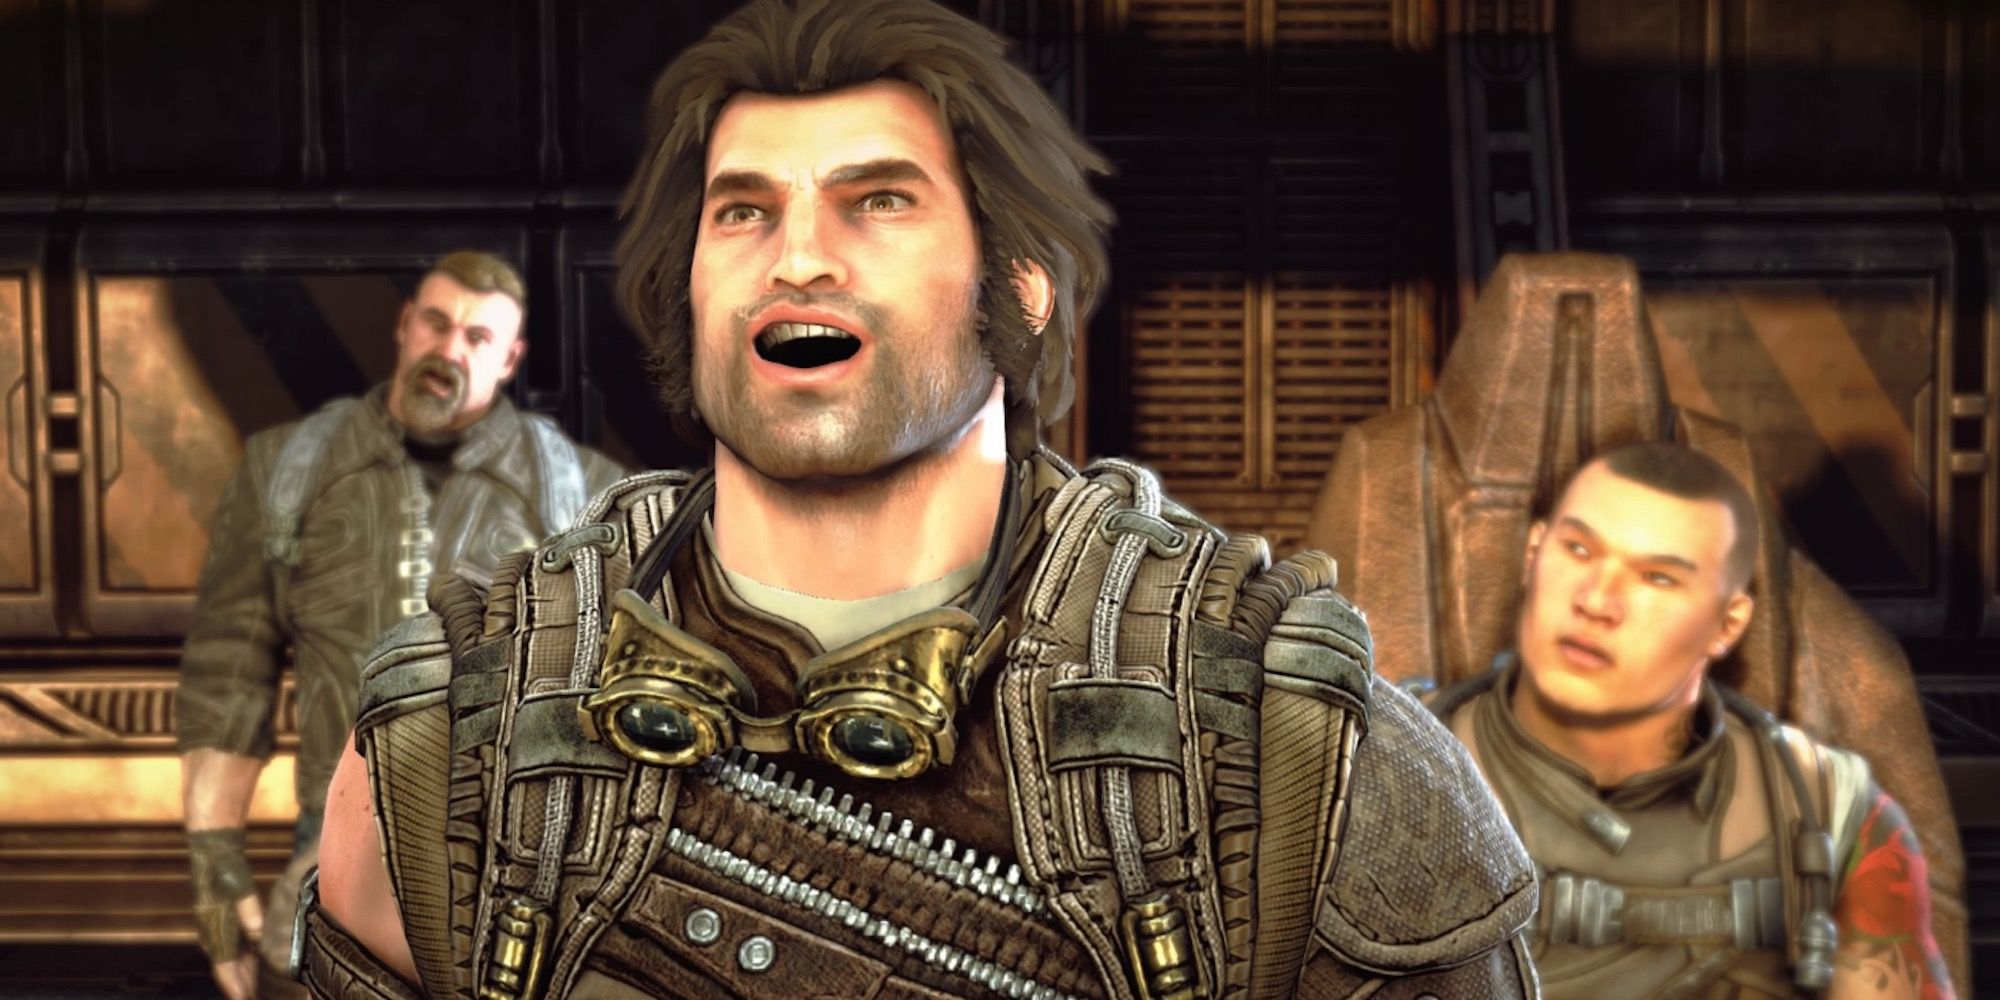 A cutscene featuring characters in Bulletstorm